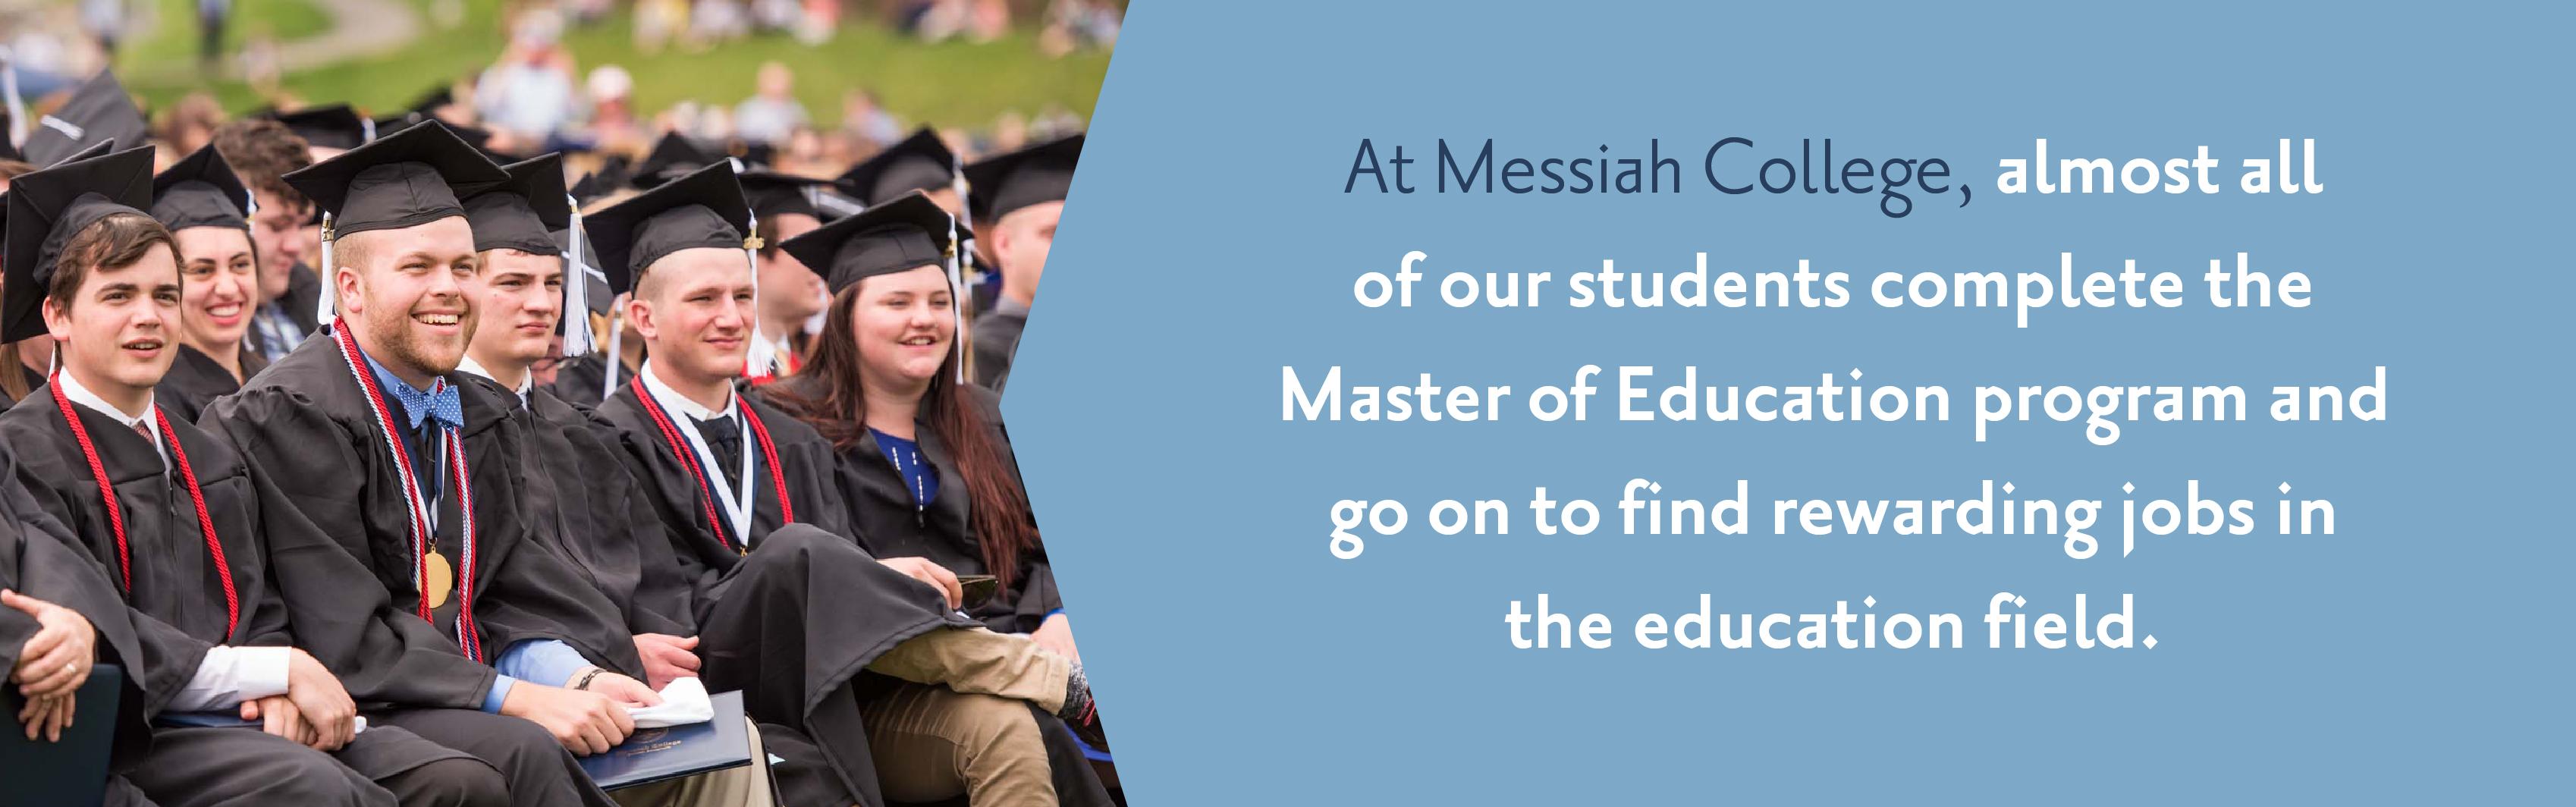 Almost all of our students complete the Master of Education program and go on to find rewarding jobs in the education field.